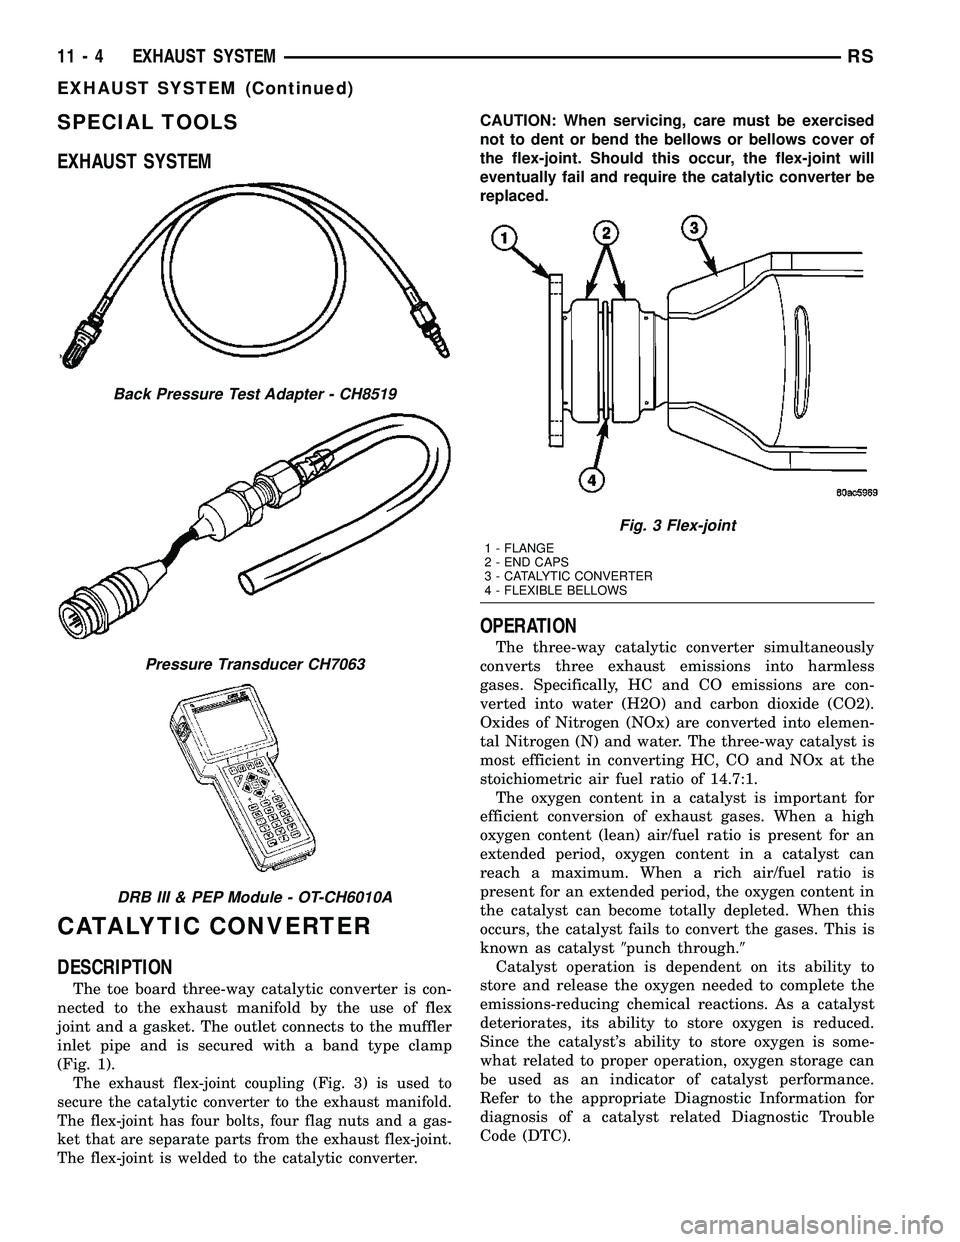 CHRYSLER VOYAGER 2004  Service Manual SPECIAL TOOLS
EXHAUST SYSTEM
CATALYTIC CONVERTER
DESCRIPTION
The toe board three-way catalytic converter is con-
nected to the exhaust manifold by the use of flex
joint and a gasket. The outlet connec